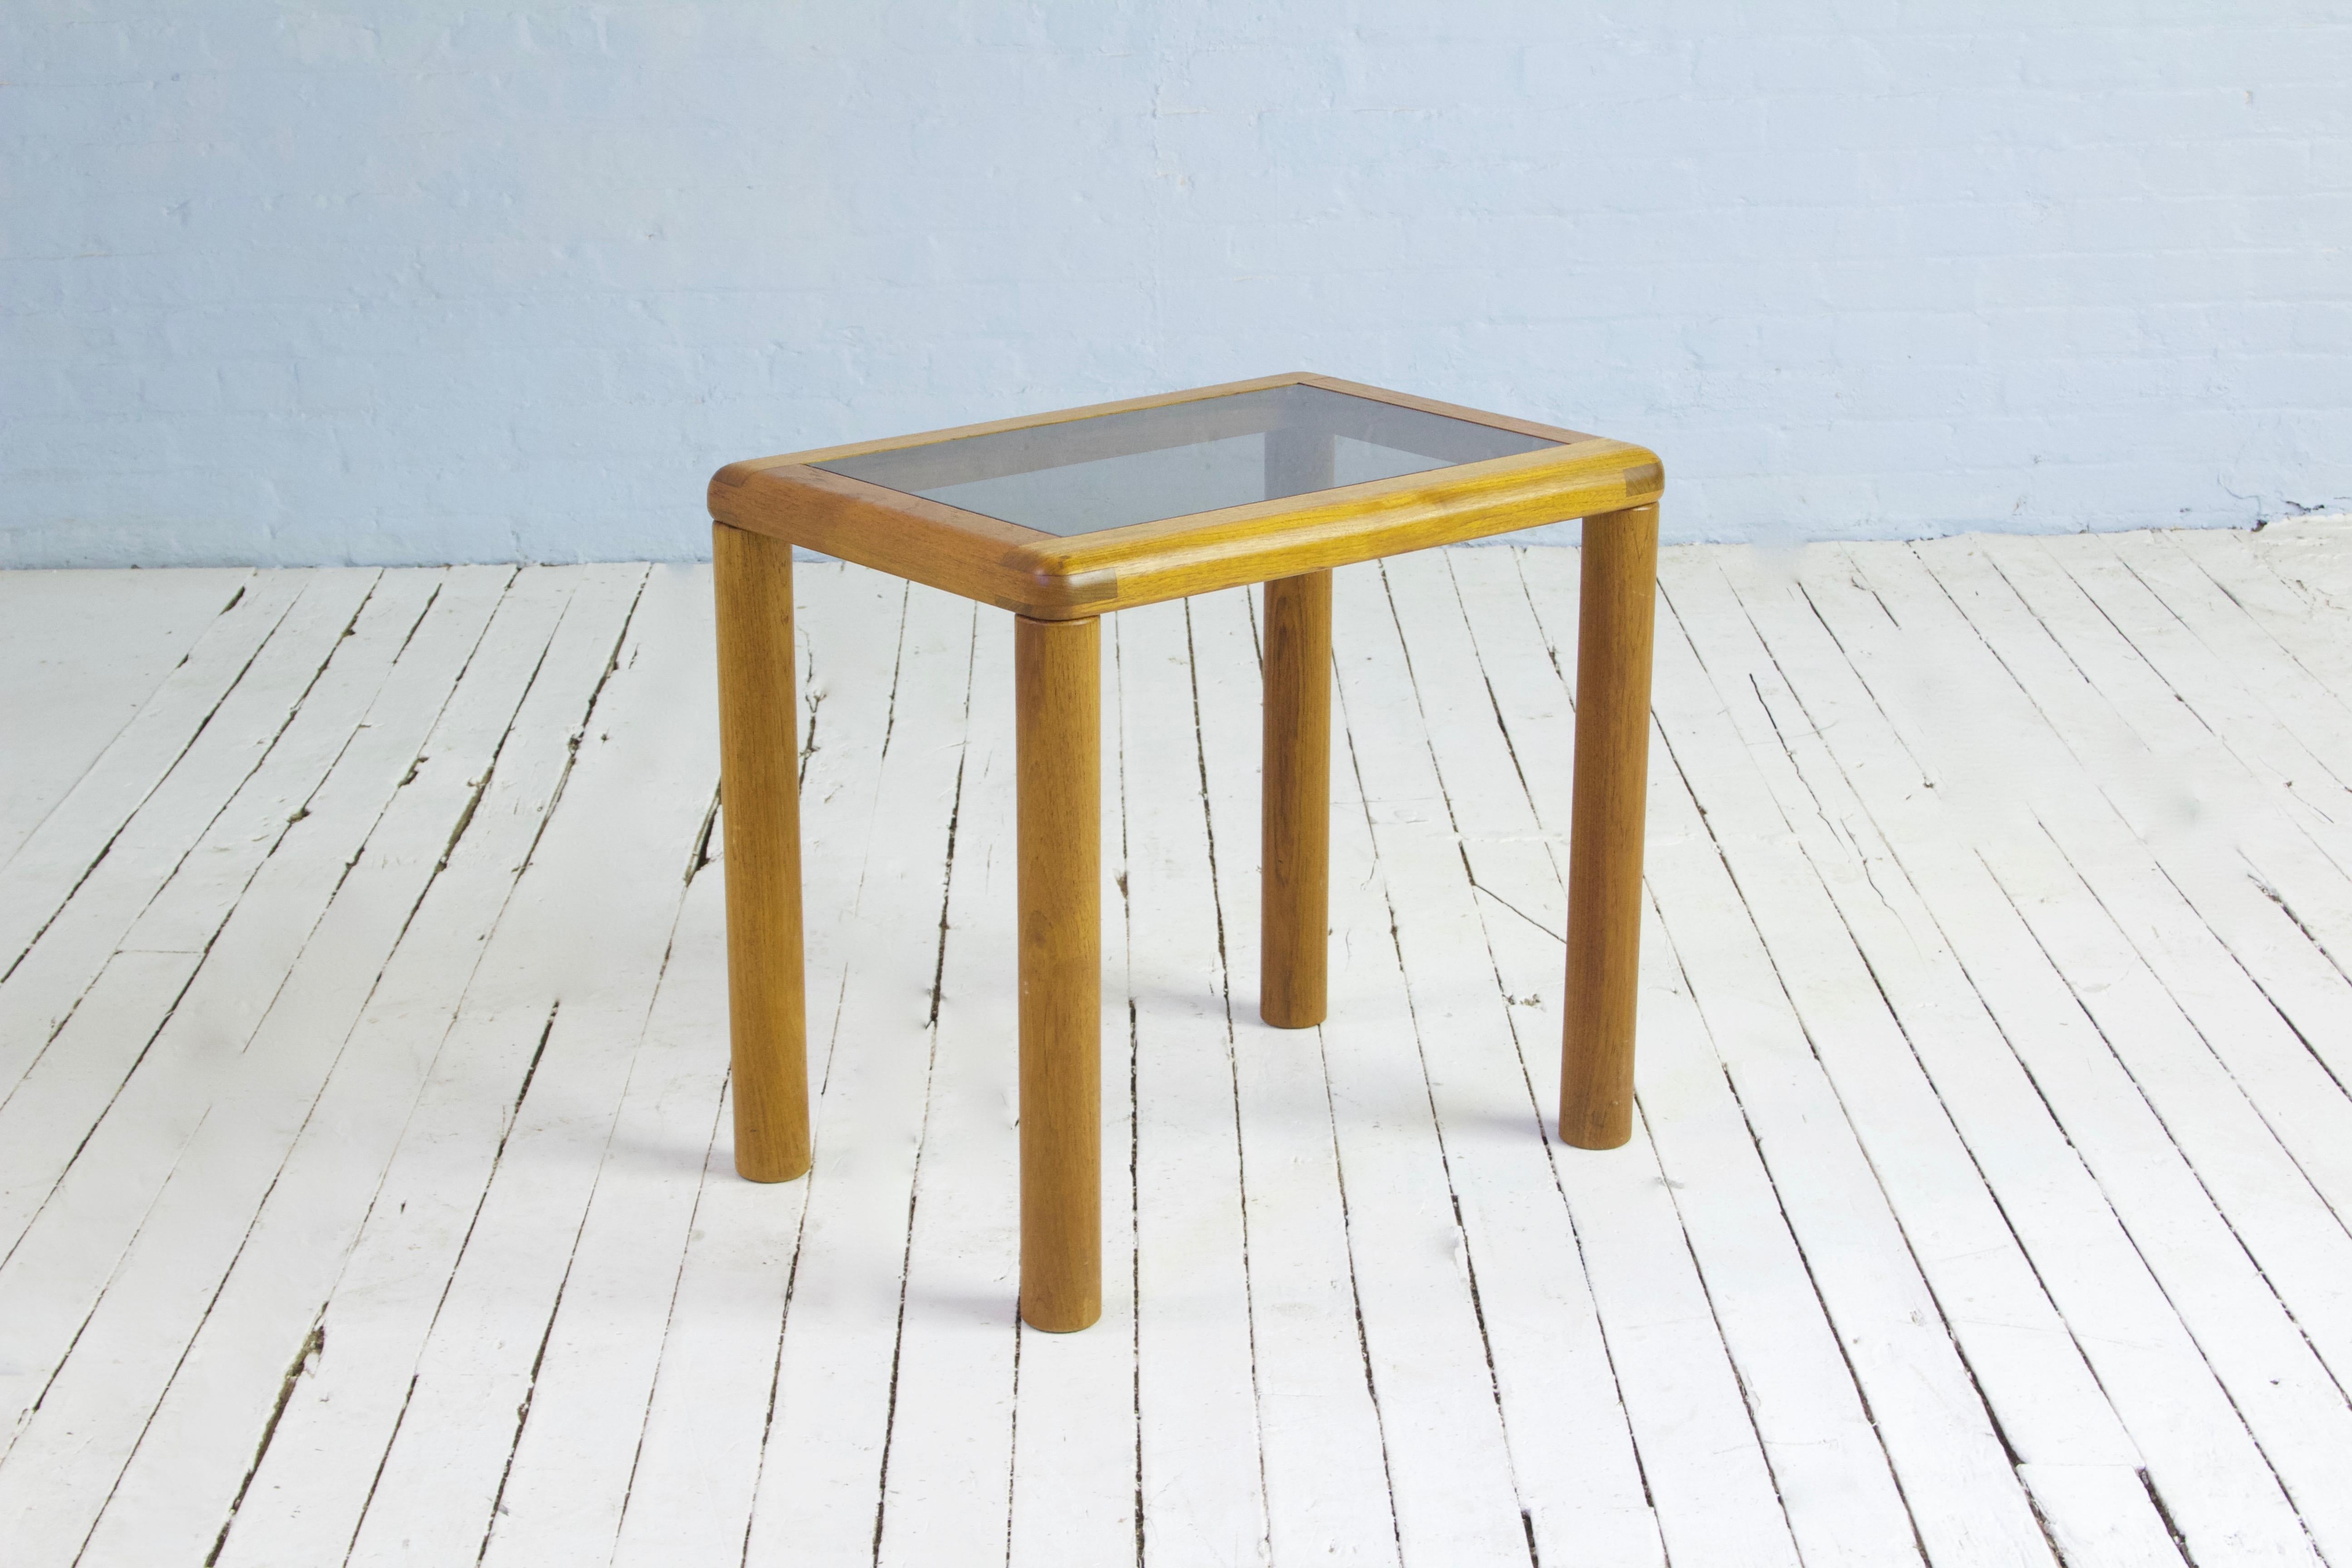 Vintage Danish side table in solid, patinated teak. Robust exposed joinery showcases the strength of this petite piece. Turned legs lend a playful appearance, while the tinted glass top and overall size make it the perfect table to accompany your